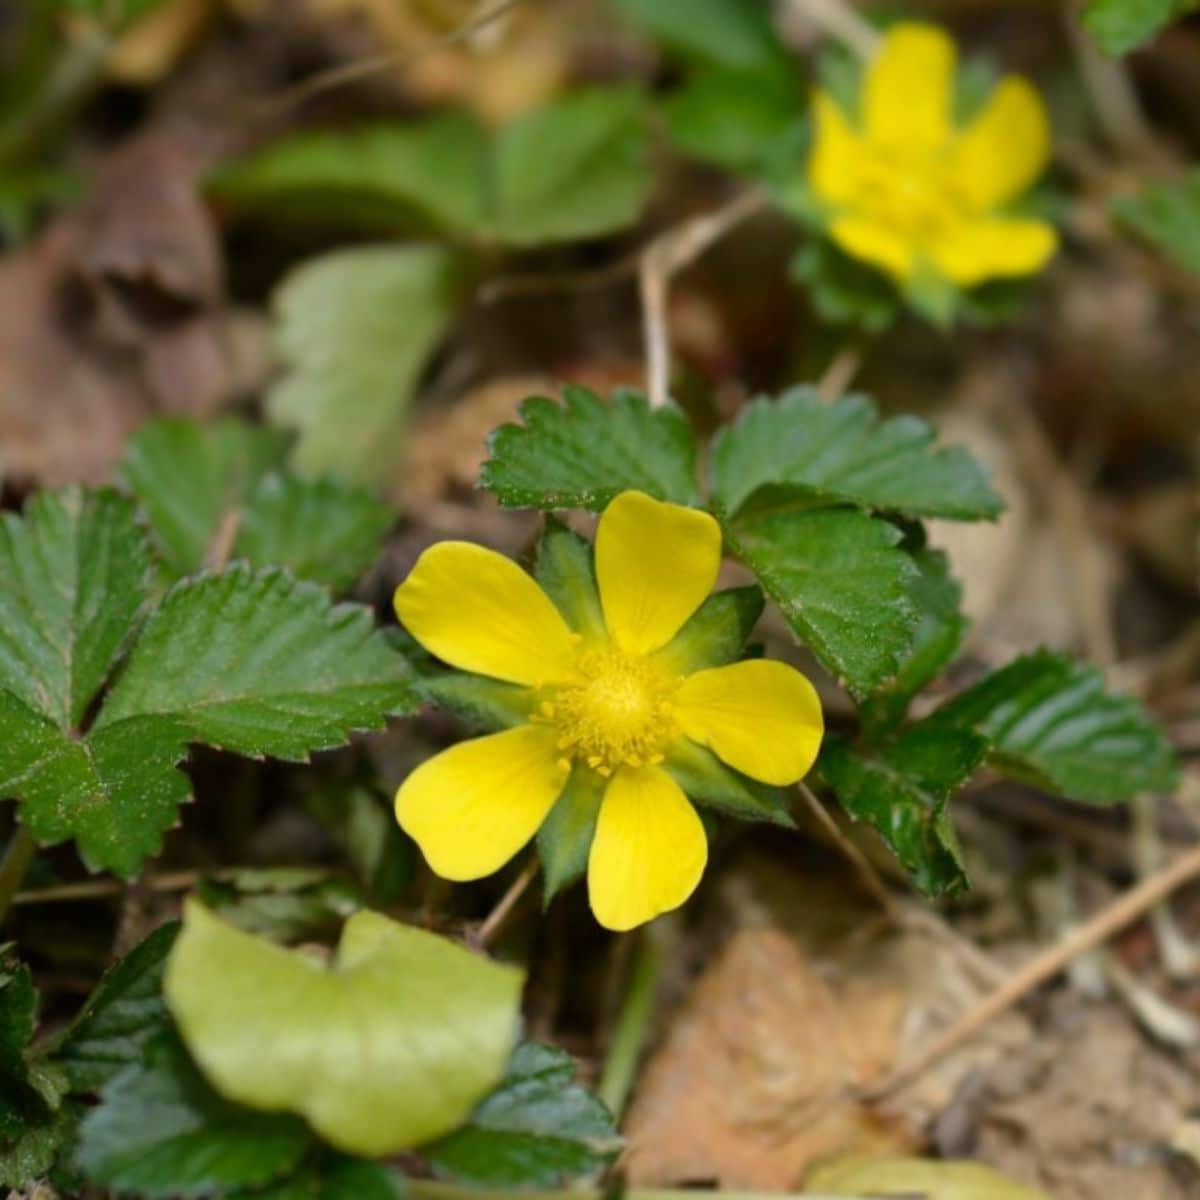 Strawberry Plants with Yellow Flowers – Strawberry Plants